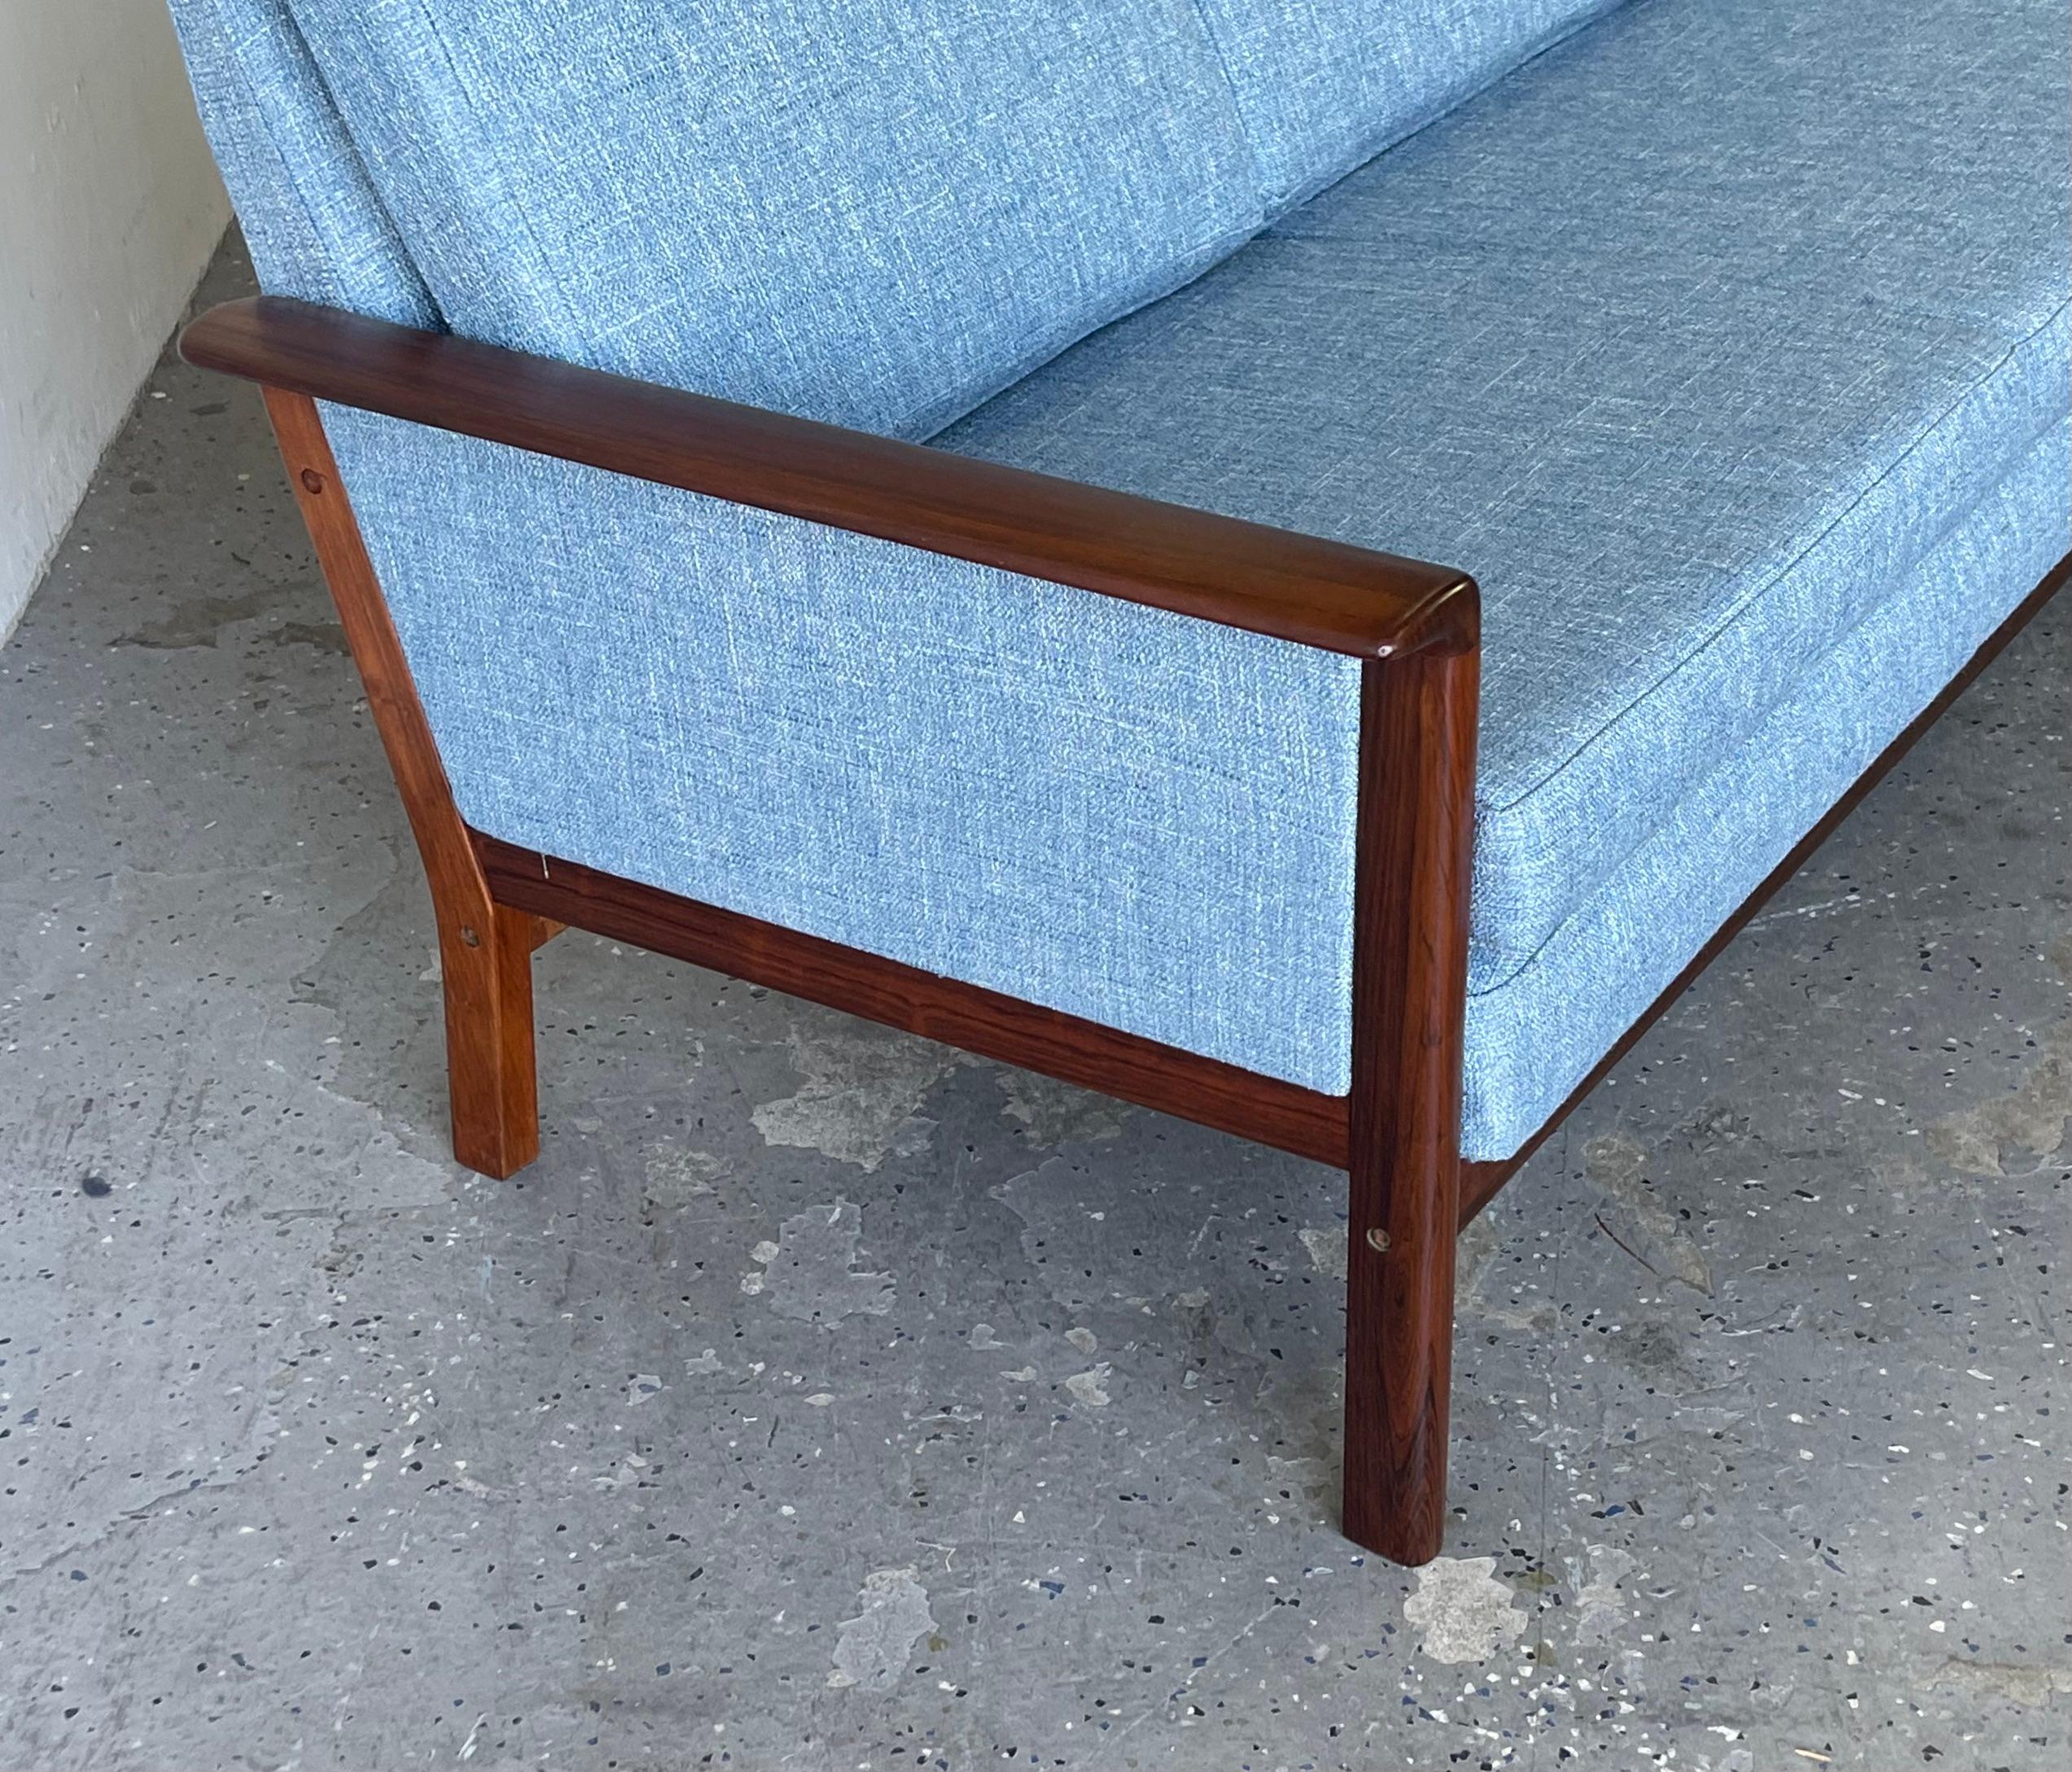 Vintage Danish Mid-Century Modern Rosewood Sofa & Lounge Chair by Westnofa For Sale 4